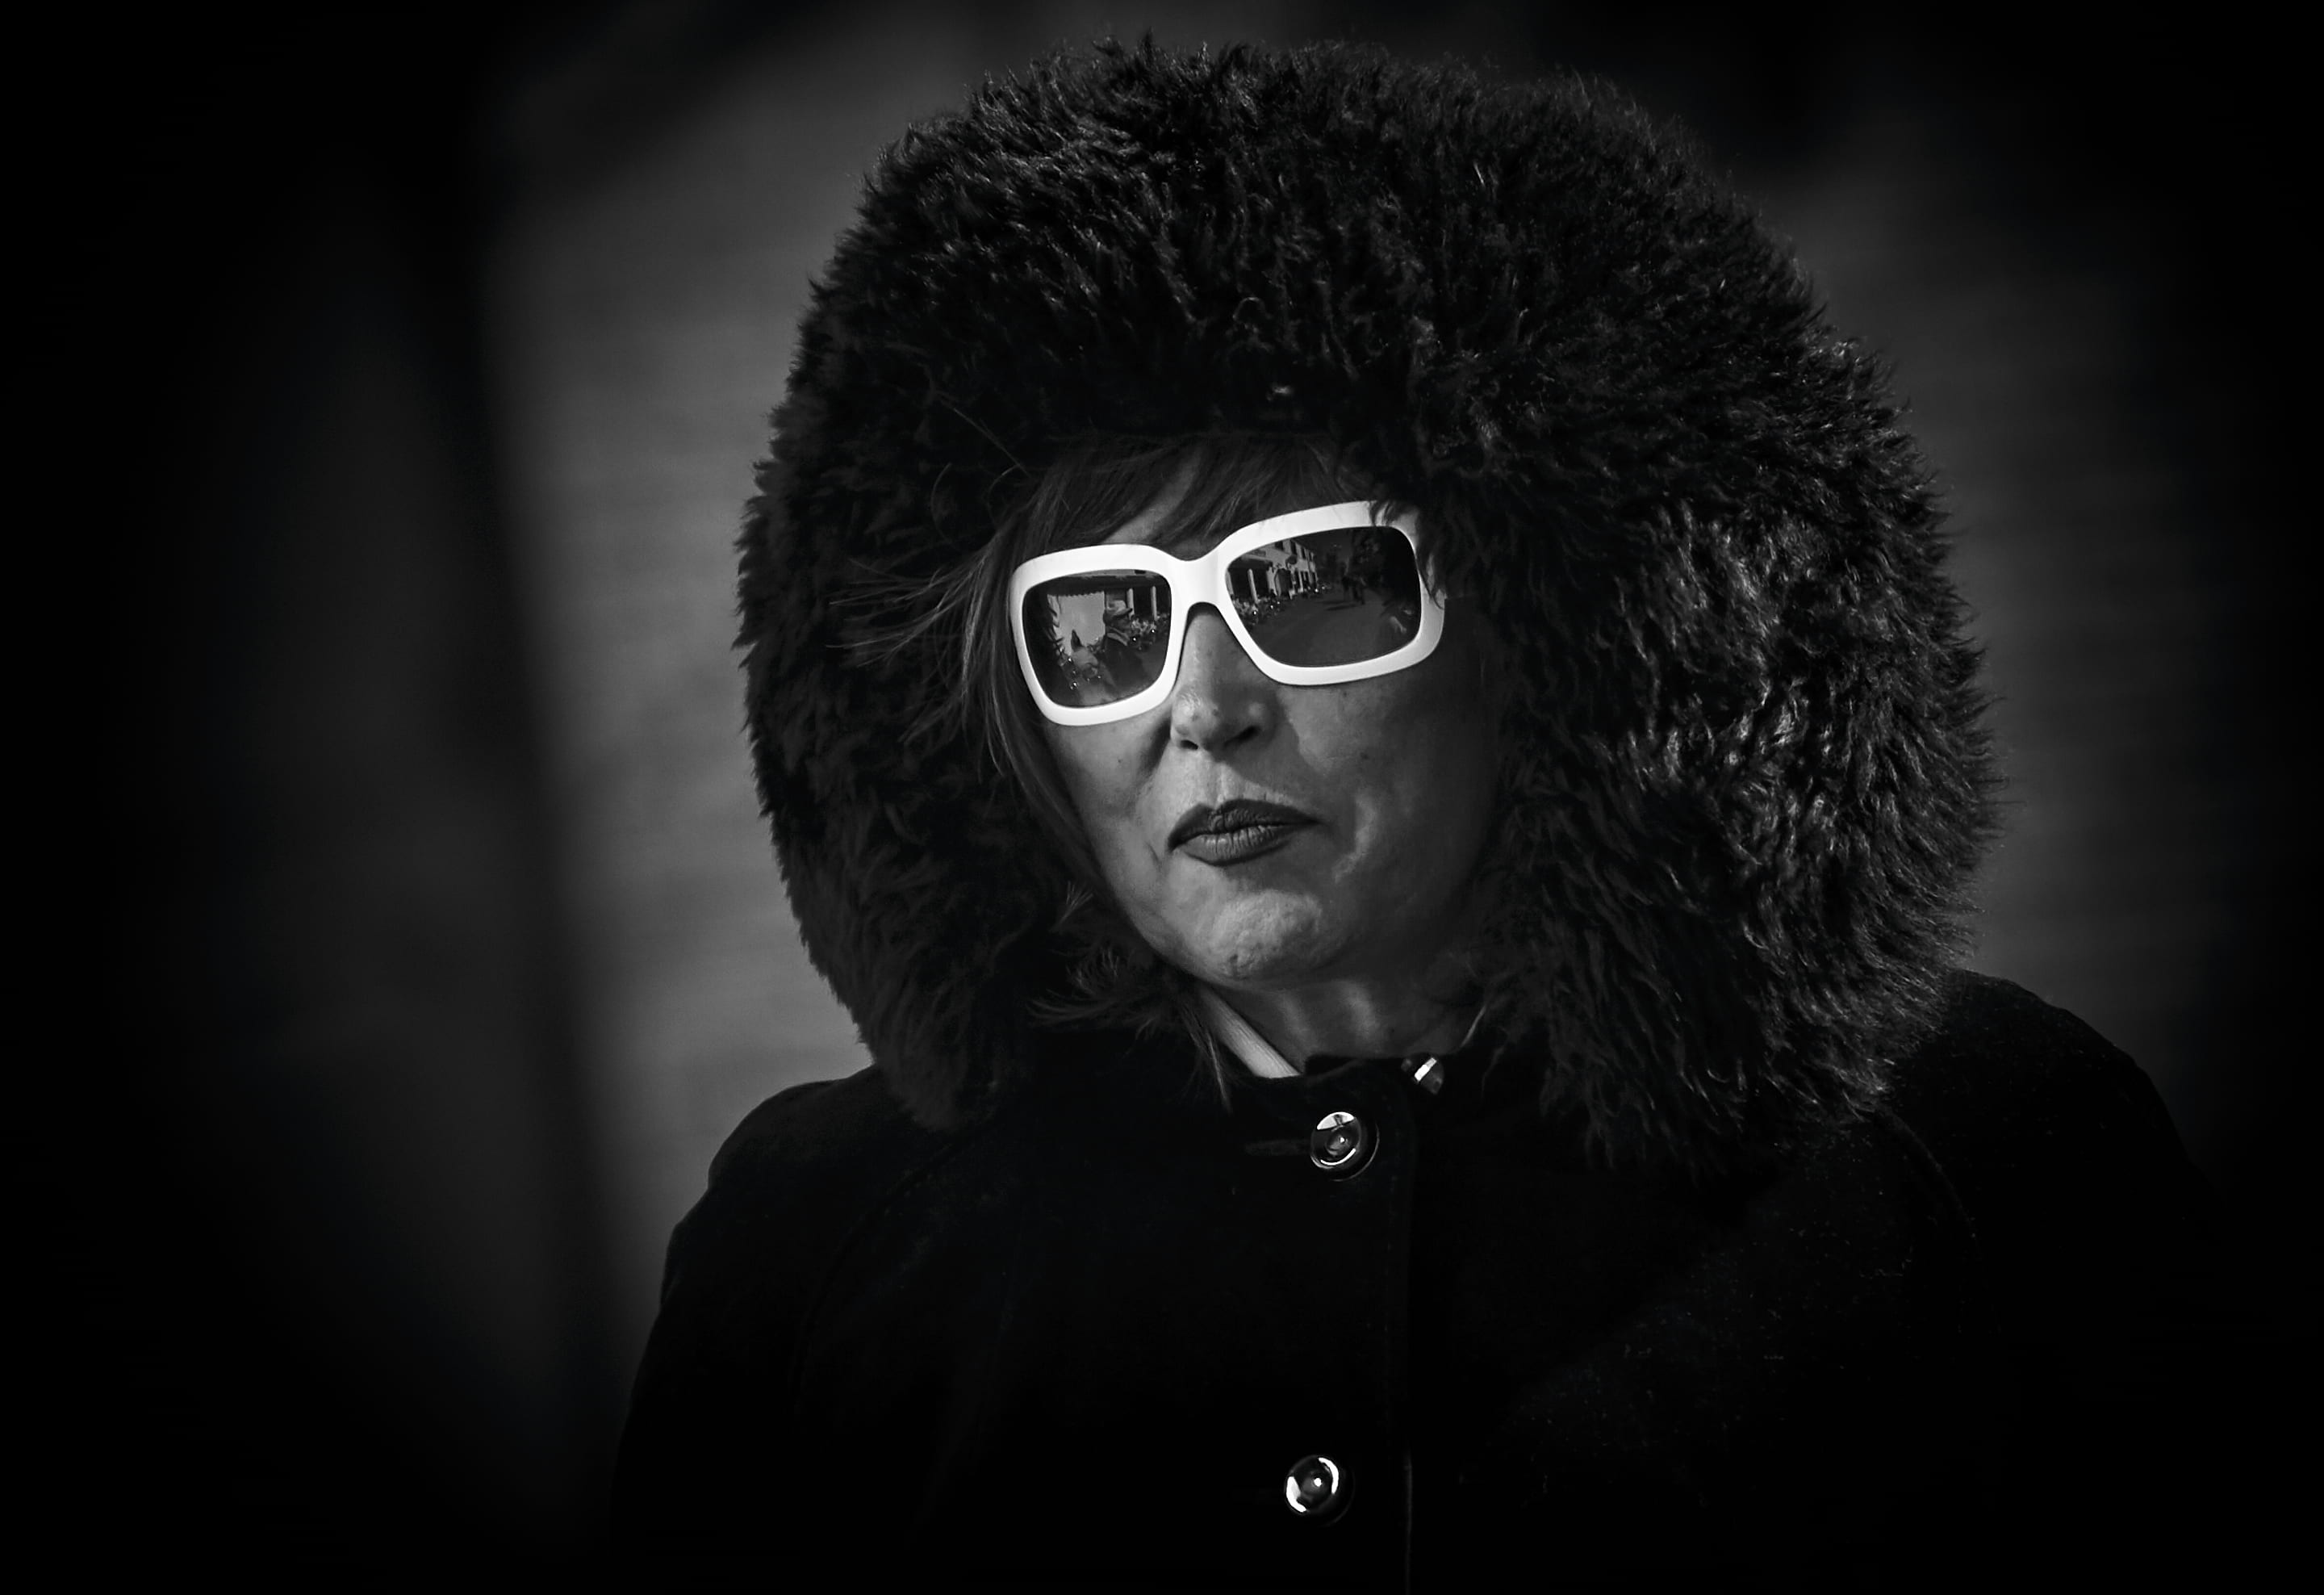 selective color of woman wearing white framed sunglasses, grayscale photo of woman wearing fur jacket